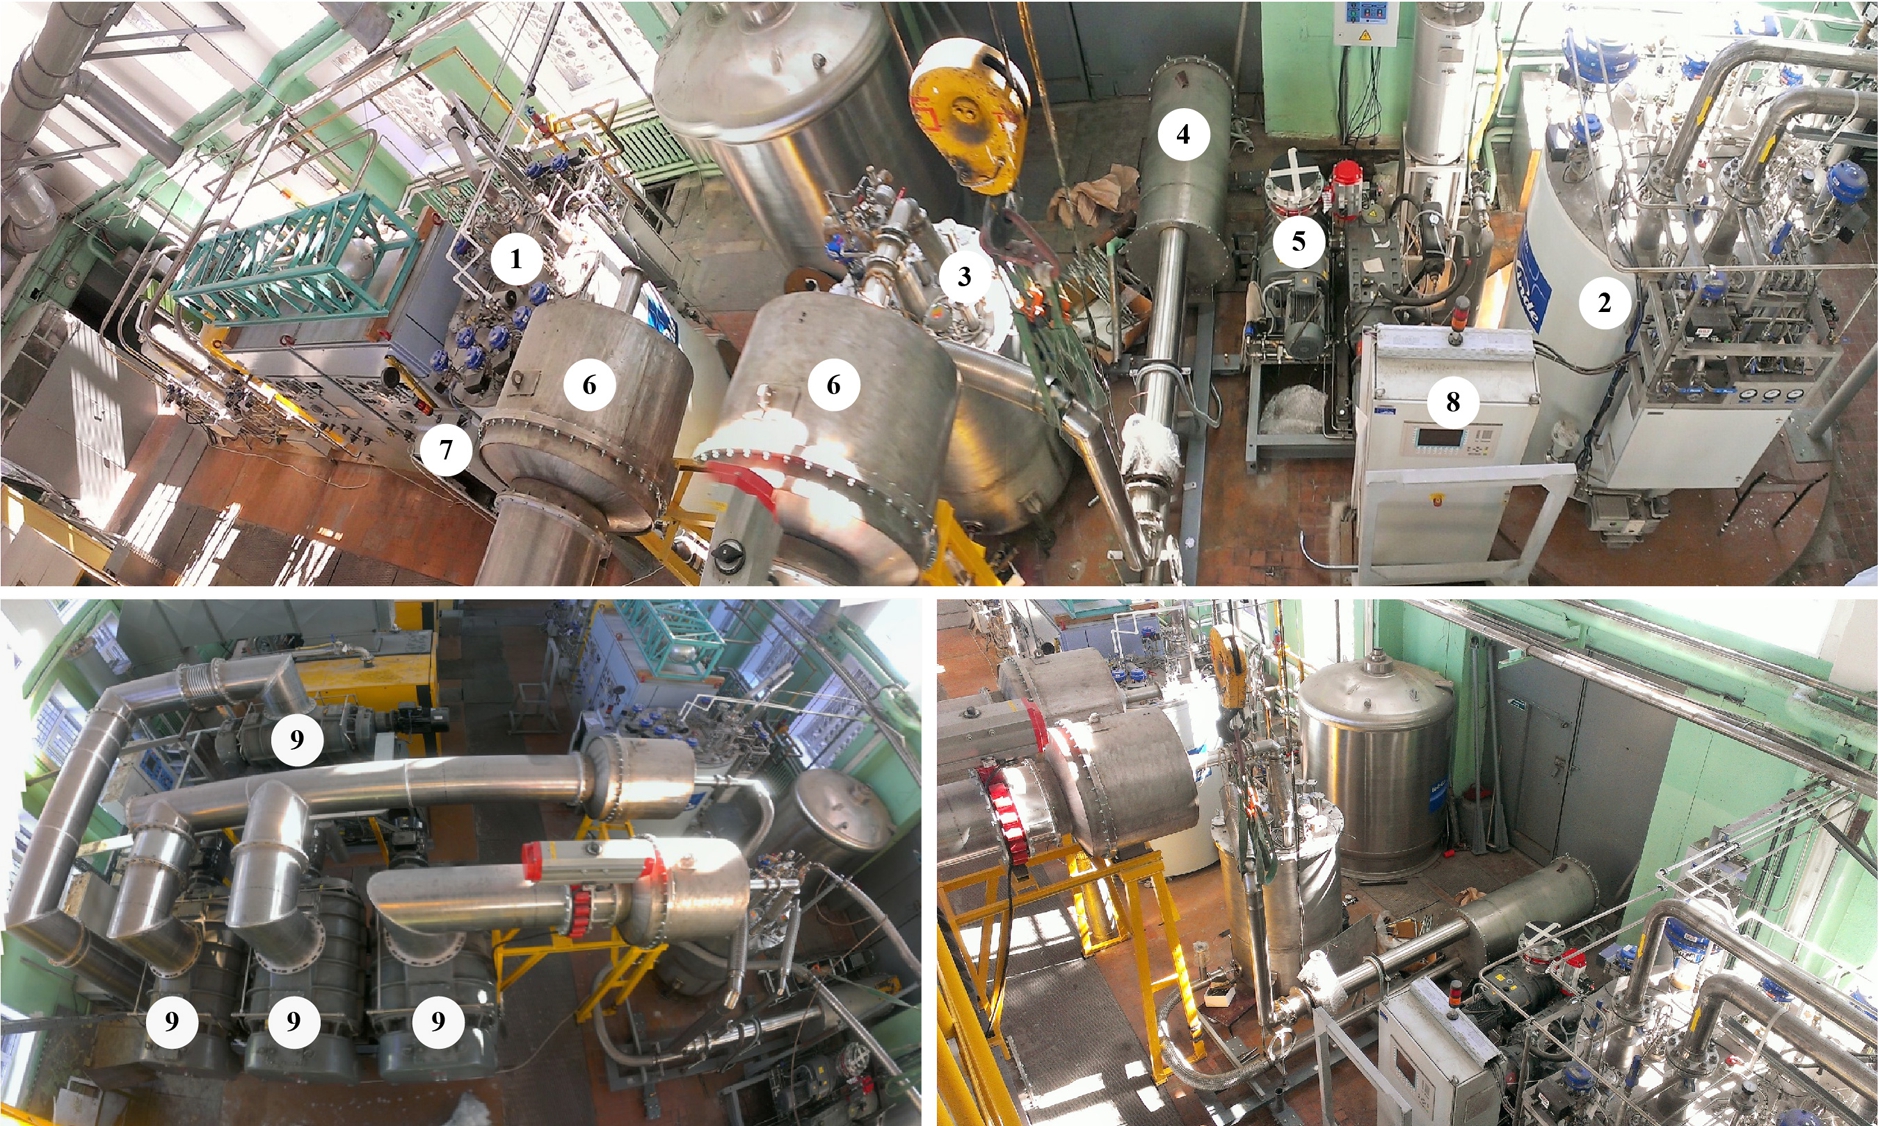 UCN source mockup at the WWR-M reactor (1 – helium liquefier L-280; 2 – helium refrigerator TCF-50; 3 – helium cryostat; 4 – UCN source model; 5 – pumping unit for isotopically pure 4He gas; 6 – helium vapor heaters; 7 – liquefier control cabinet; 8 – refrigerator control cabinet; 9 – helium roots pumps).